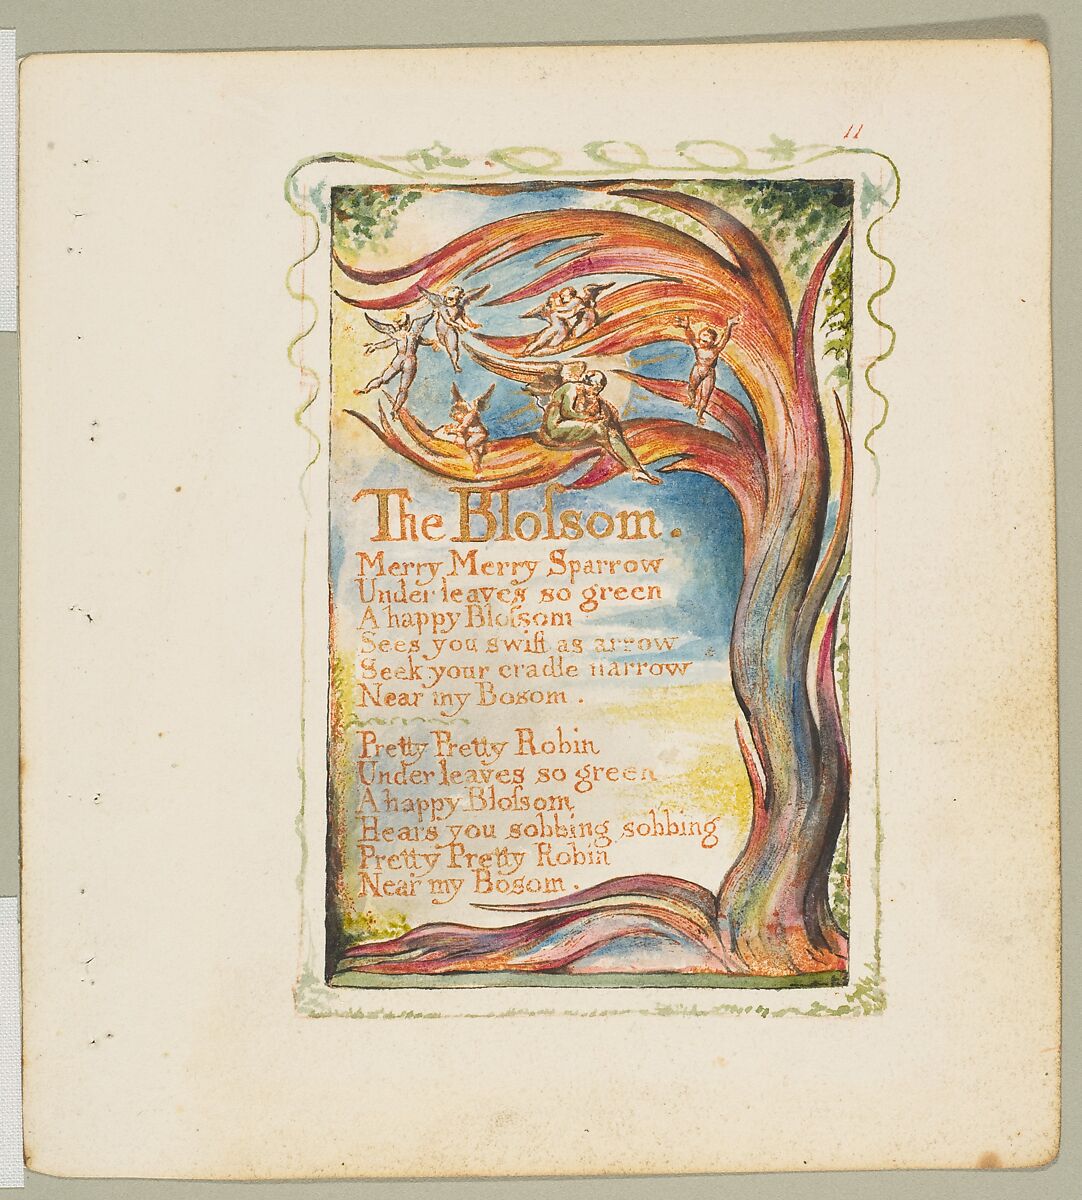 Songs of Innocence: The Blossom, William Blake, Relief etching printed in orange-brown ink and hand-colored with watercolor and shell gold